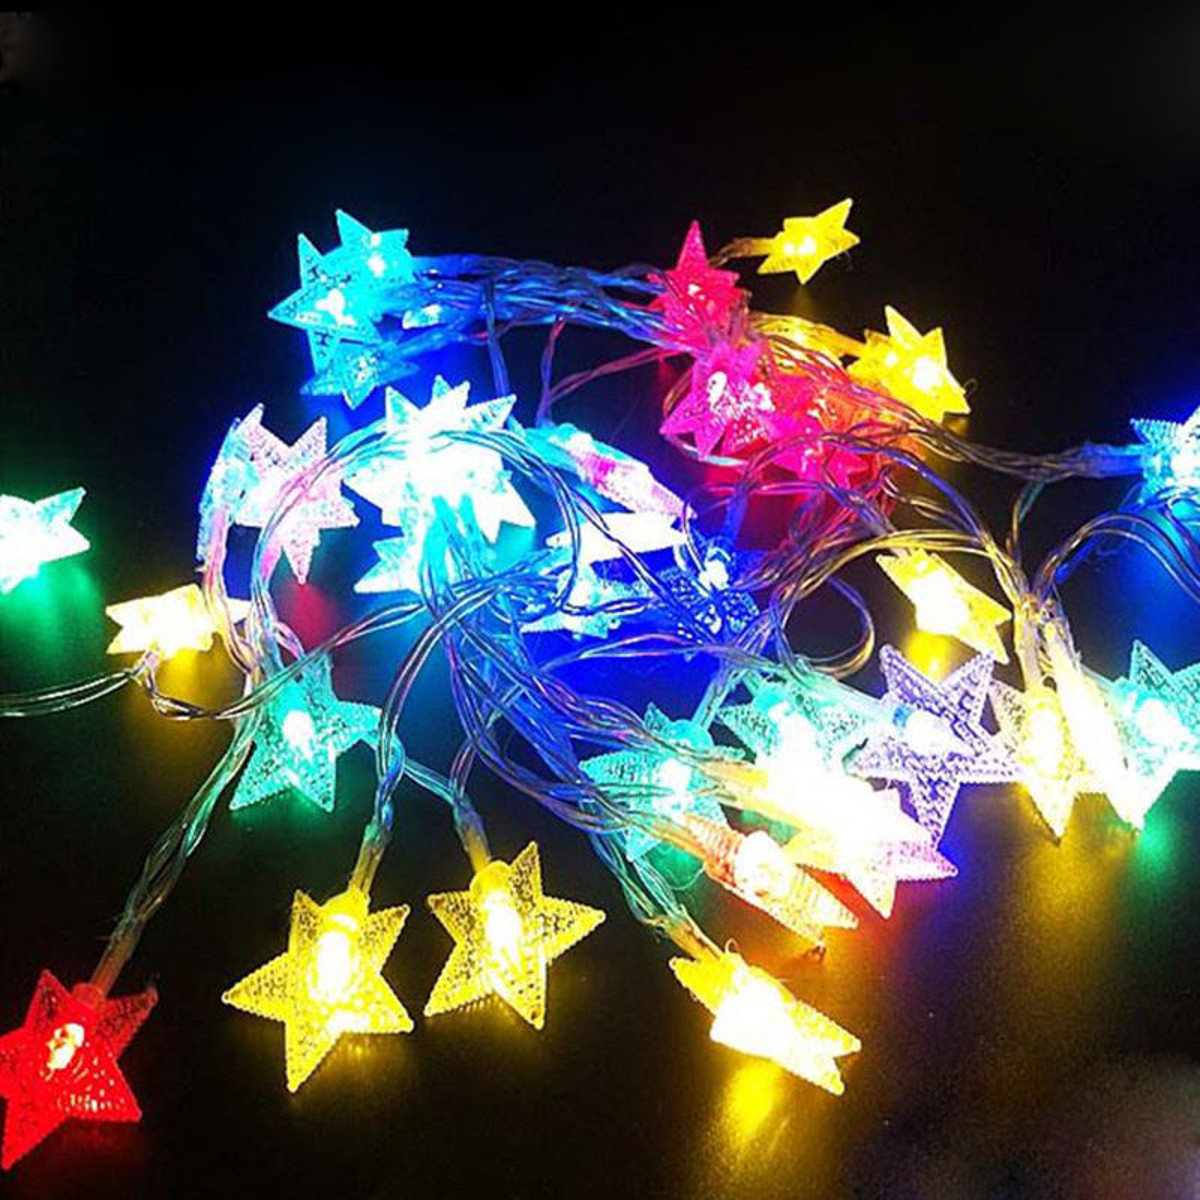 

10M 100 LED 220V Fairy String Star Light Lamp Wedding Xmas Party Outdoor Indoor Room Decor, Multicolor cold white warm white